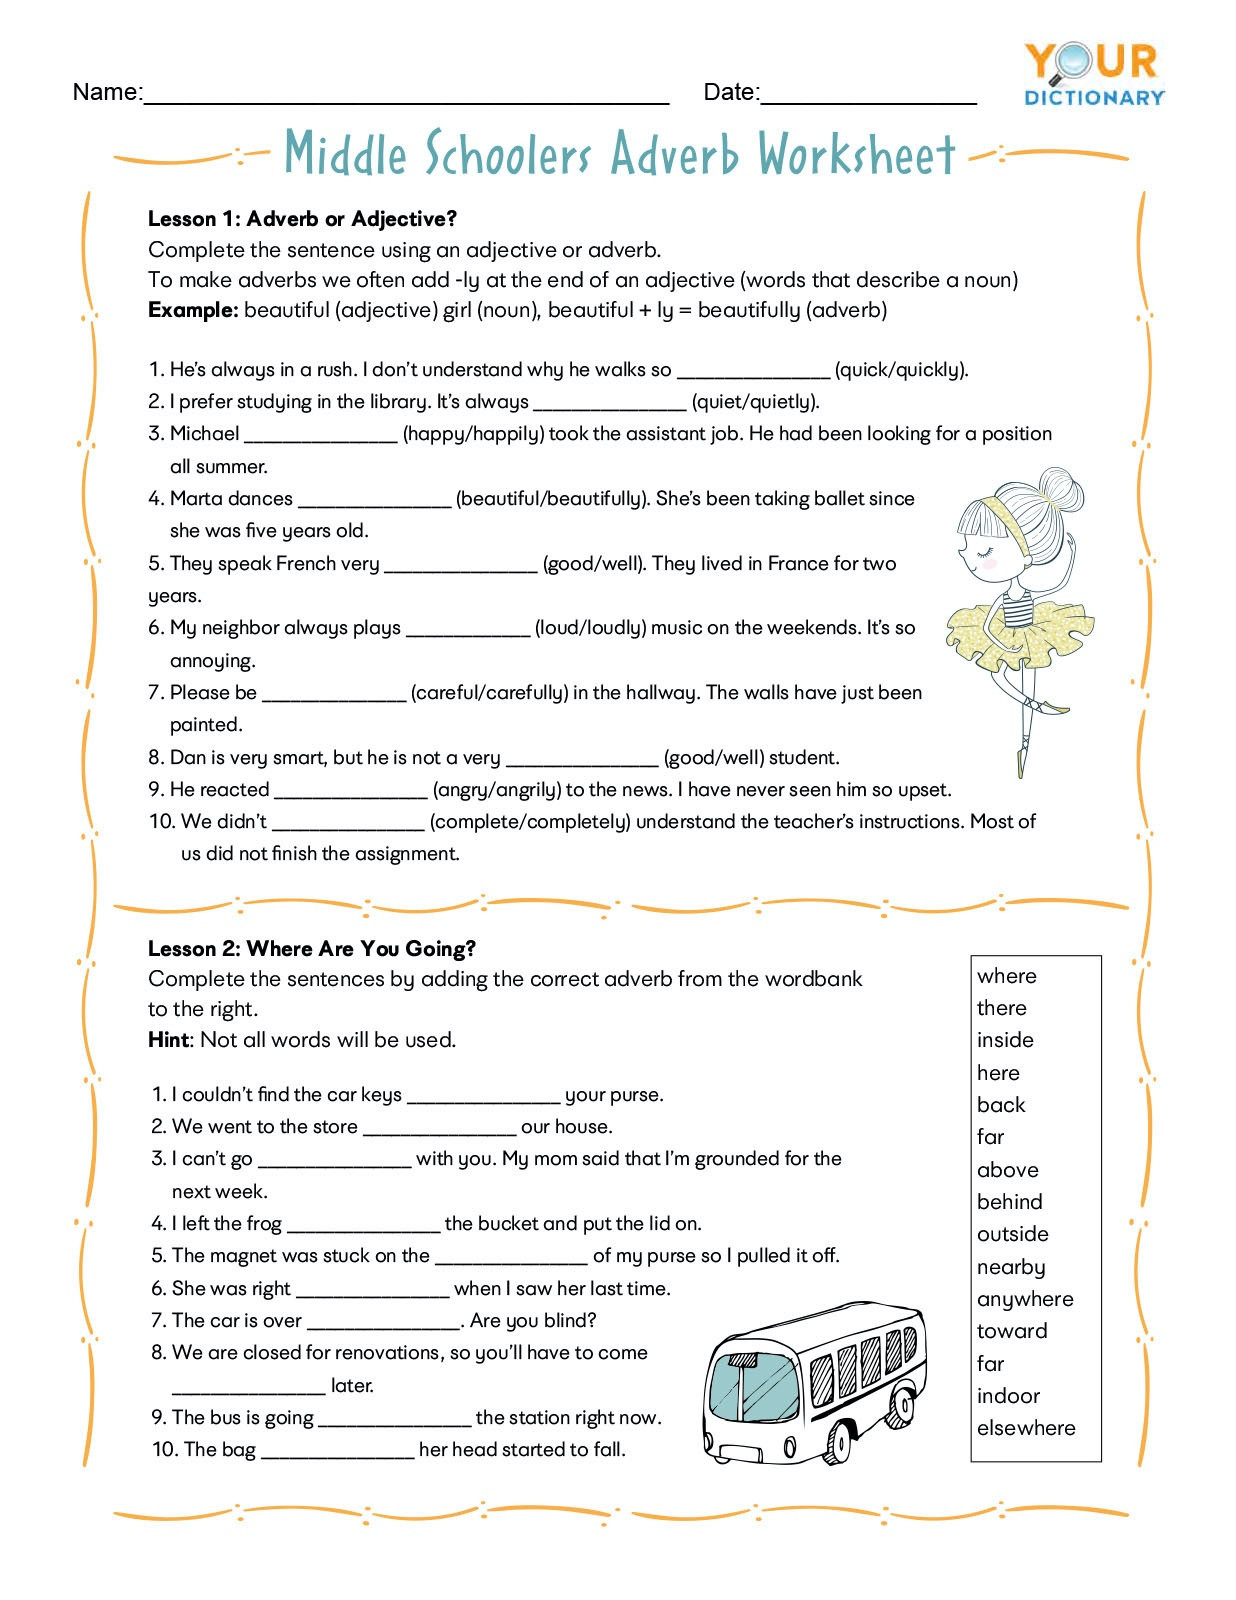 4th Grade Adverb Worksheets Adverb Worksheets for Elementary and Middle School